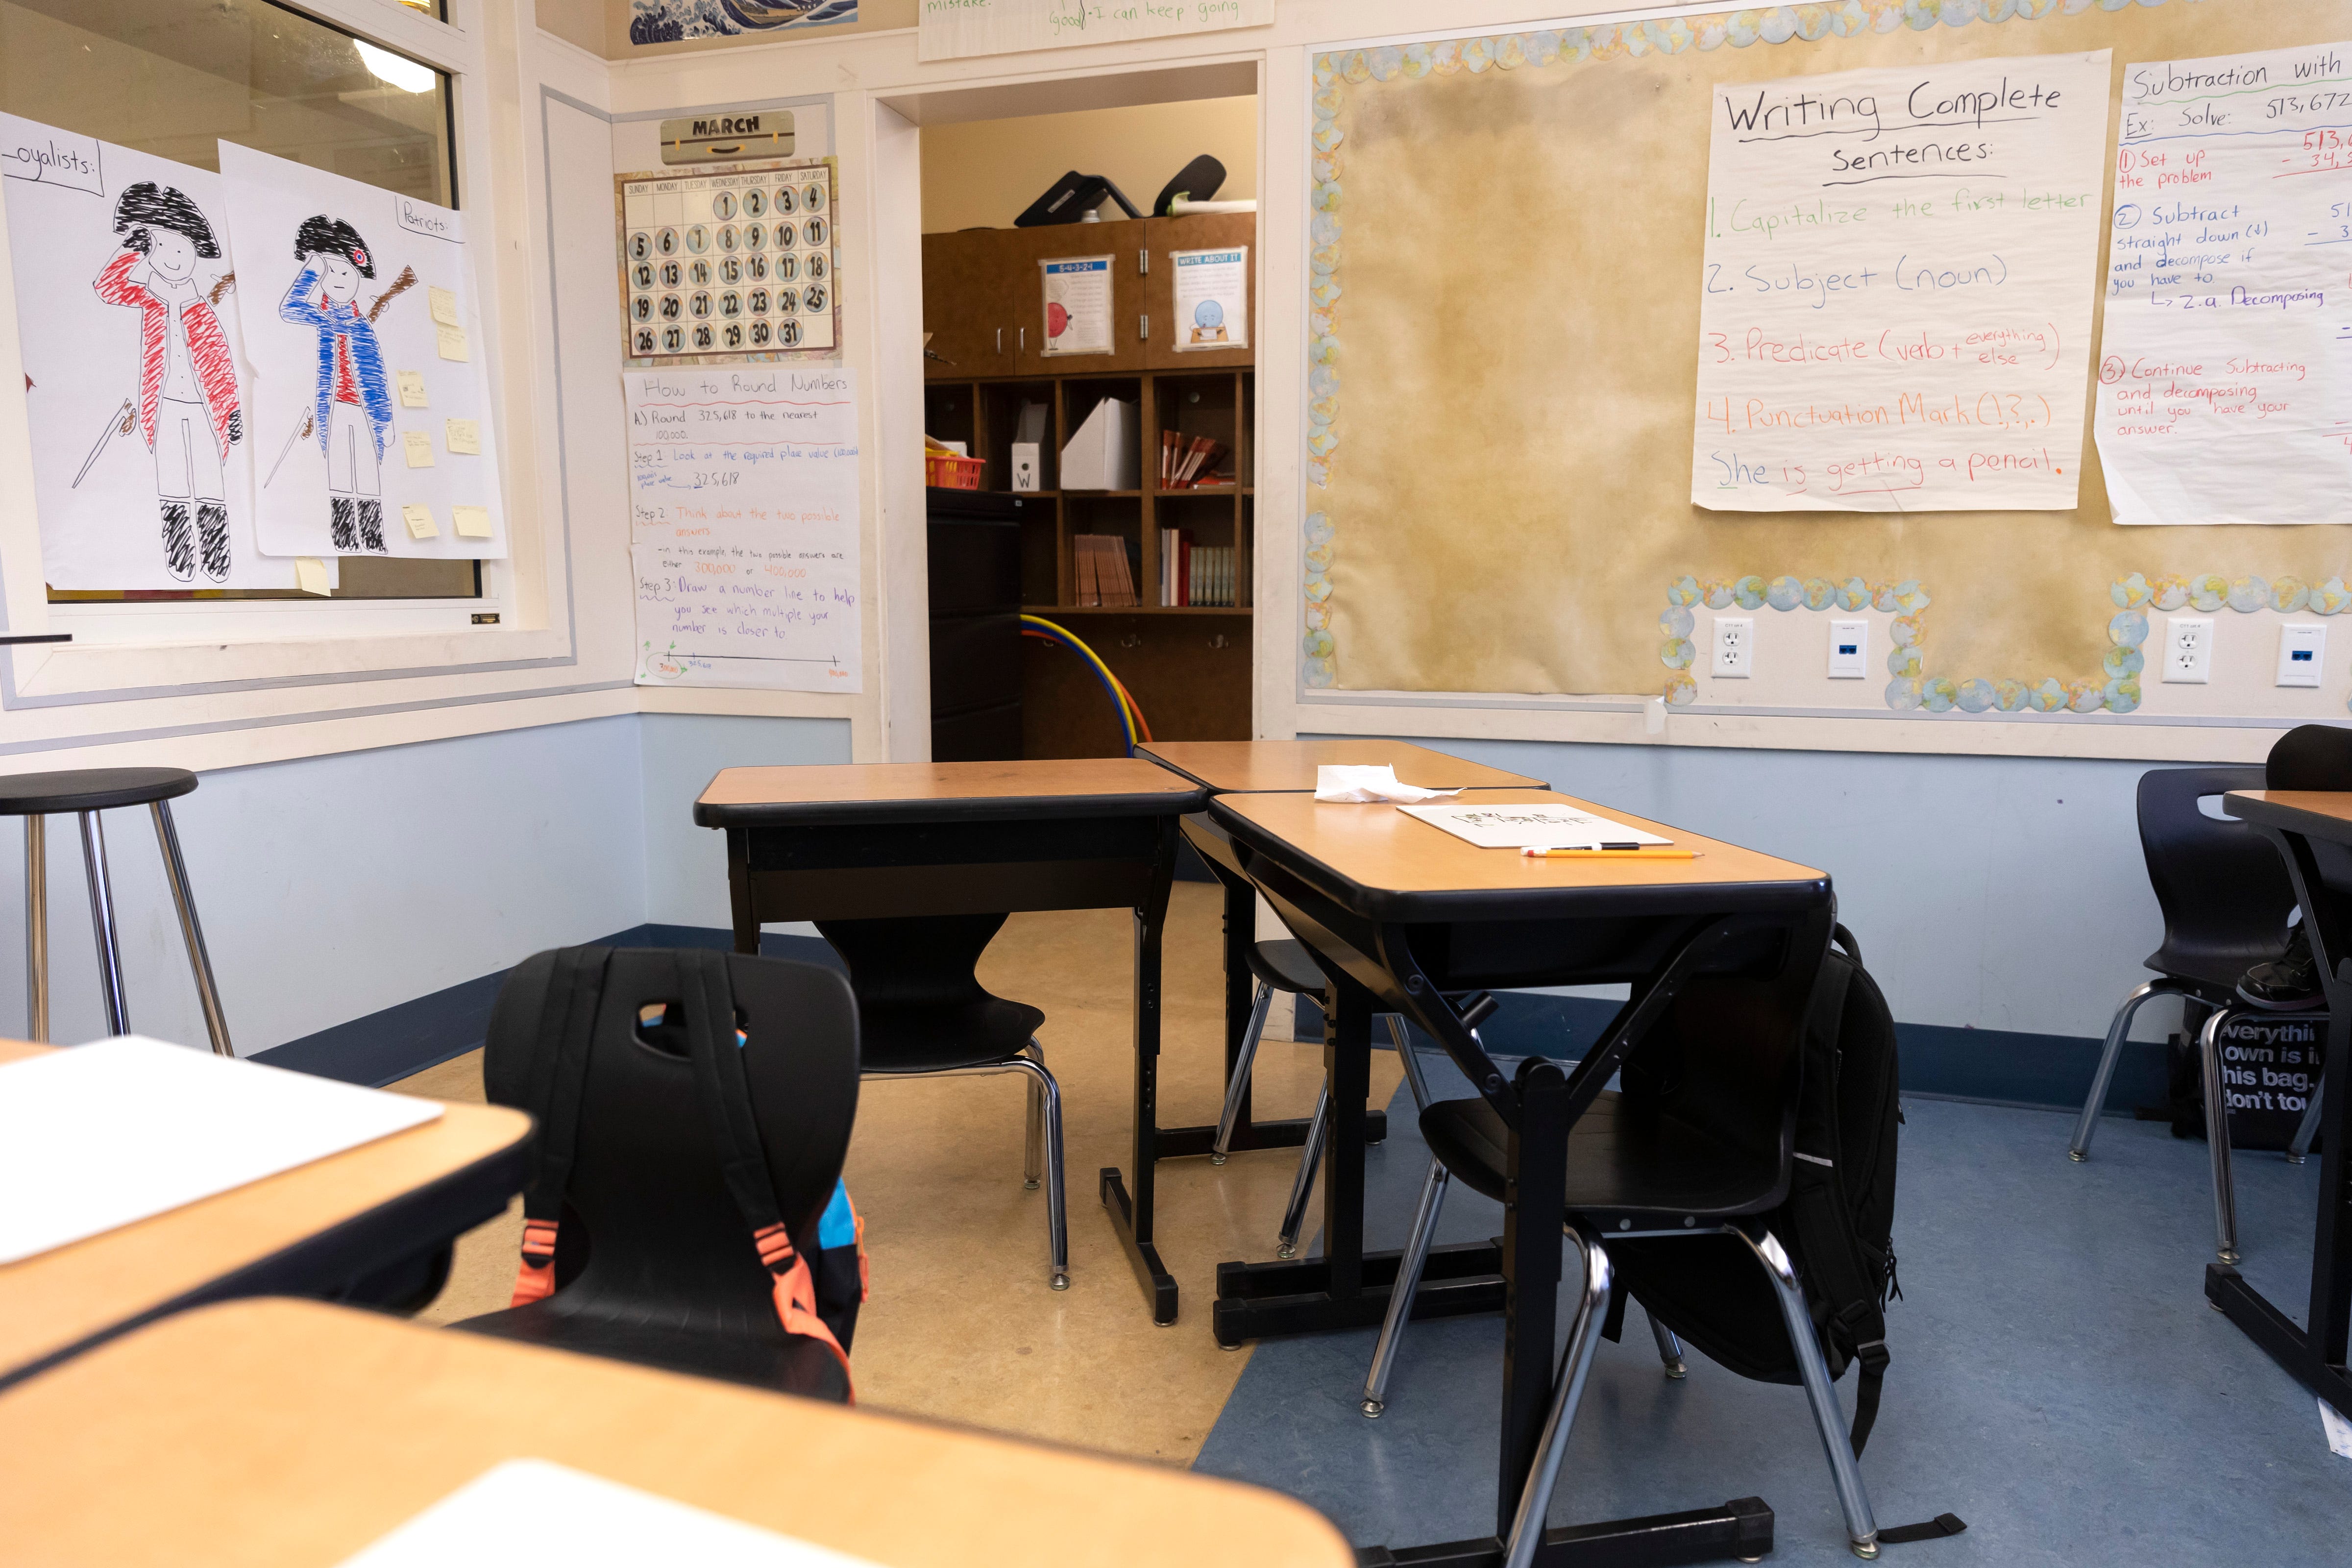 An empty desk belonging to Jayceon Davis, a student, is seen in the corner of the classroom at Nystrom Elementary in Richmond, Calif.